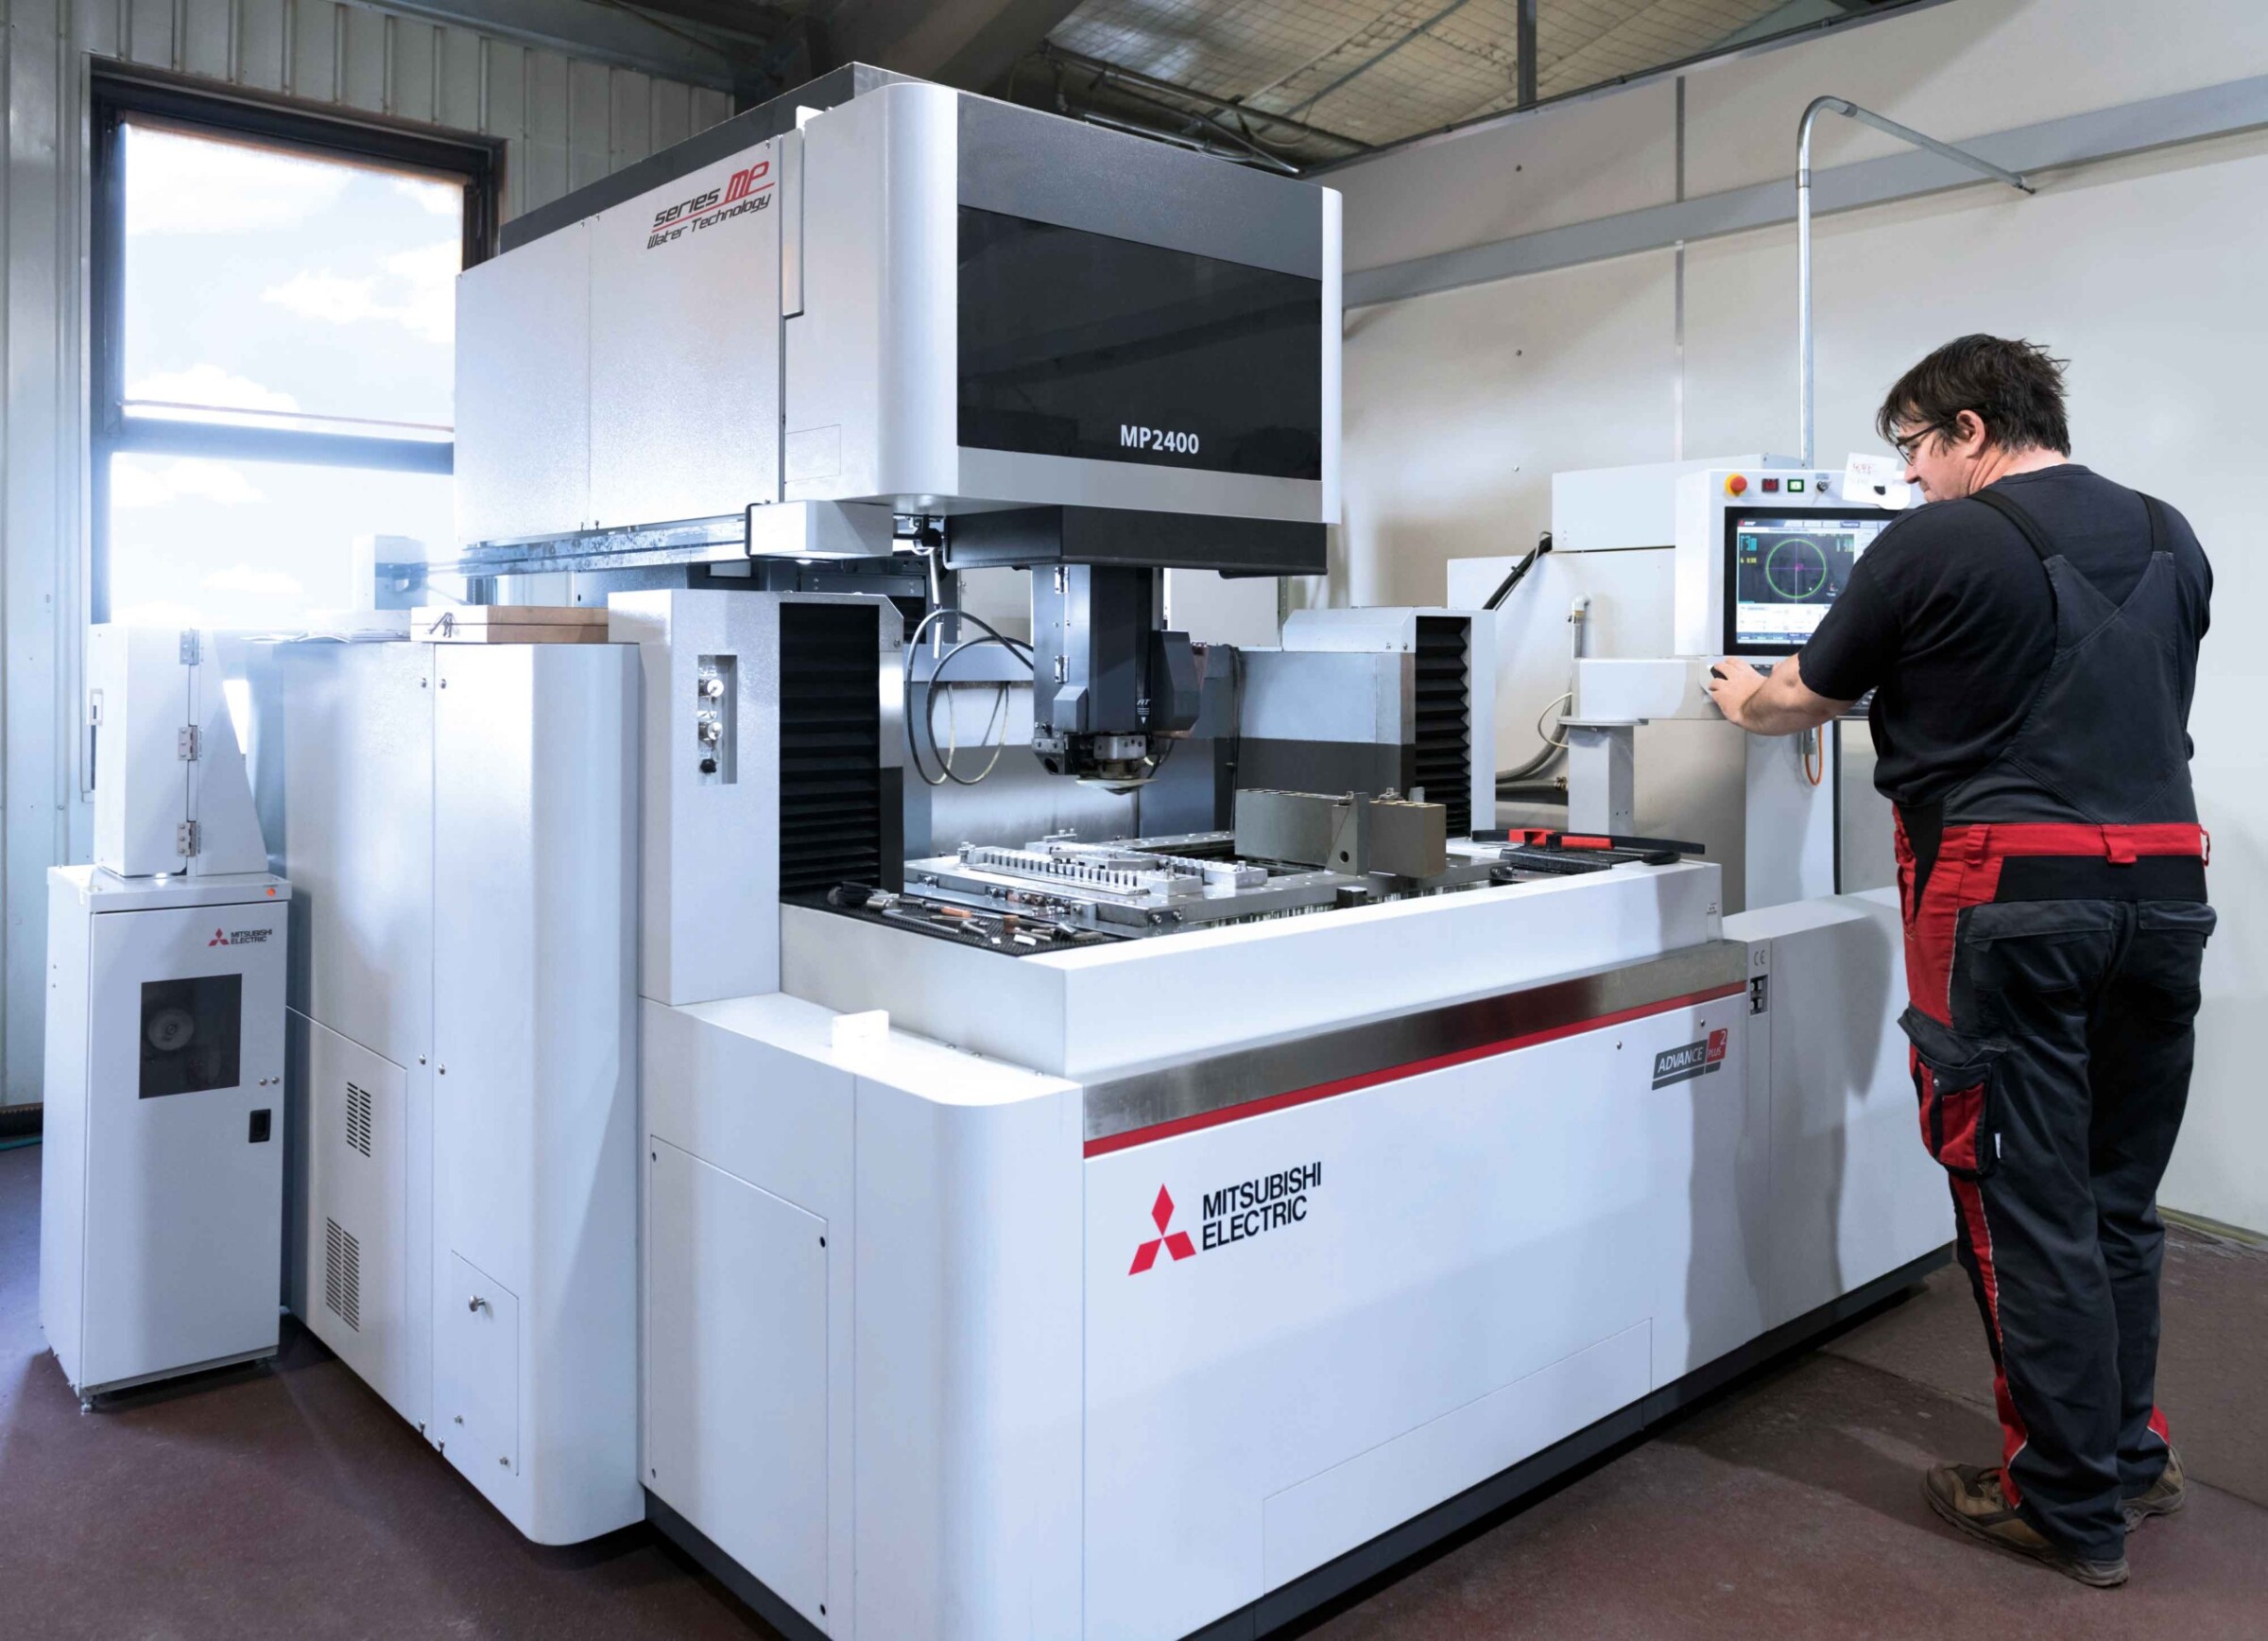 TROB’s latest new machine: the wire EDM system MP2400 from Mitsubishi Electric